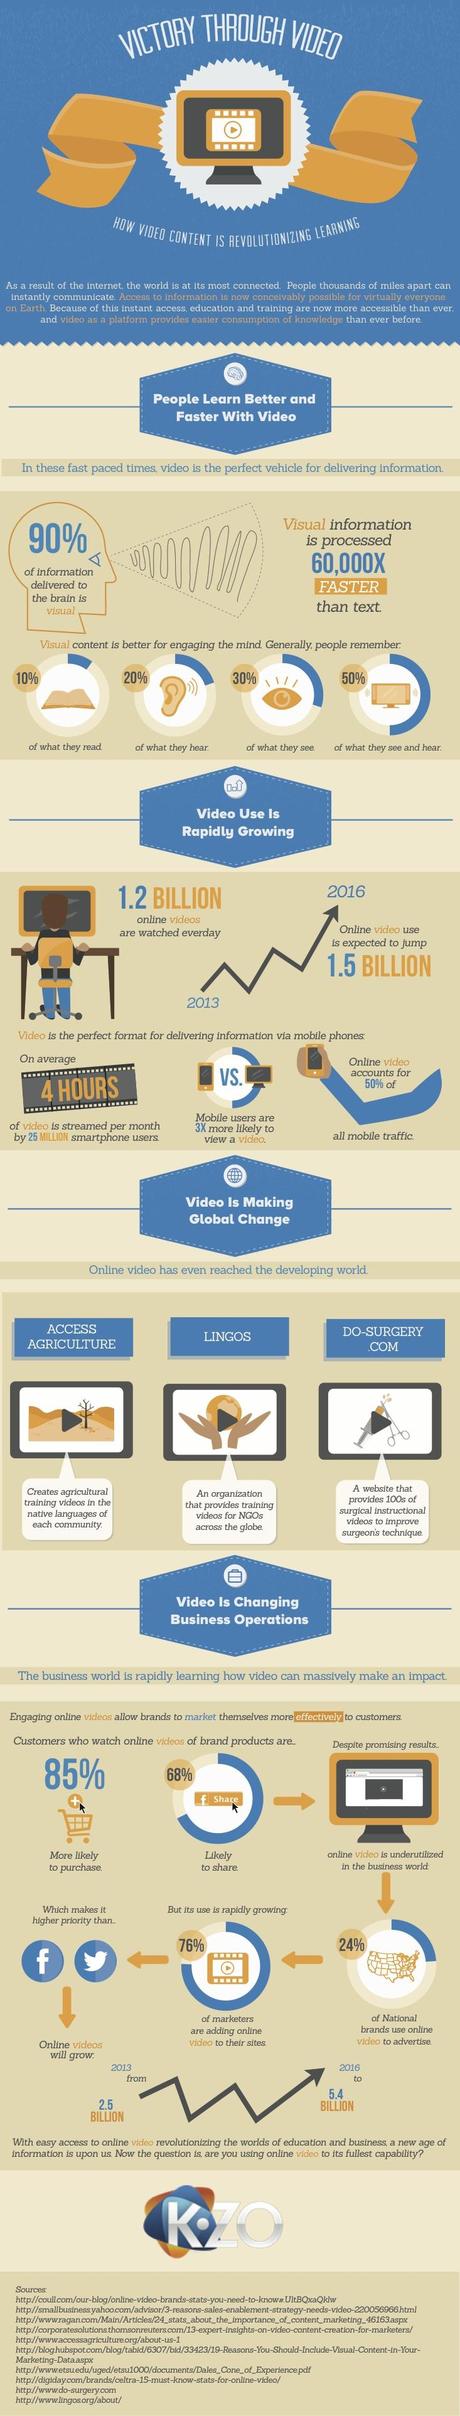 How video content is revolutionizing learning